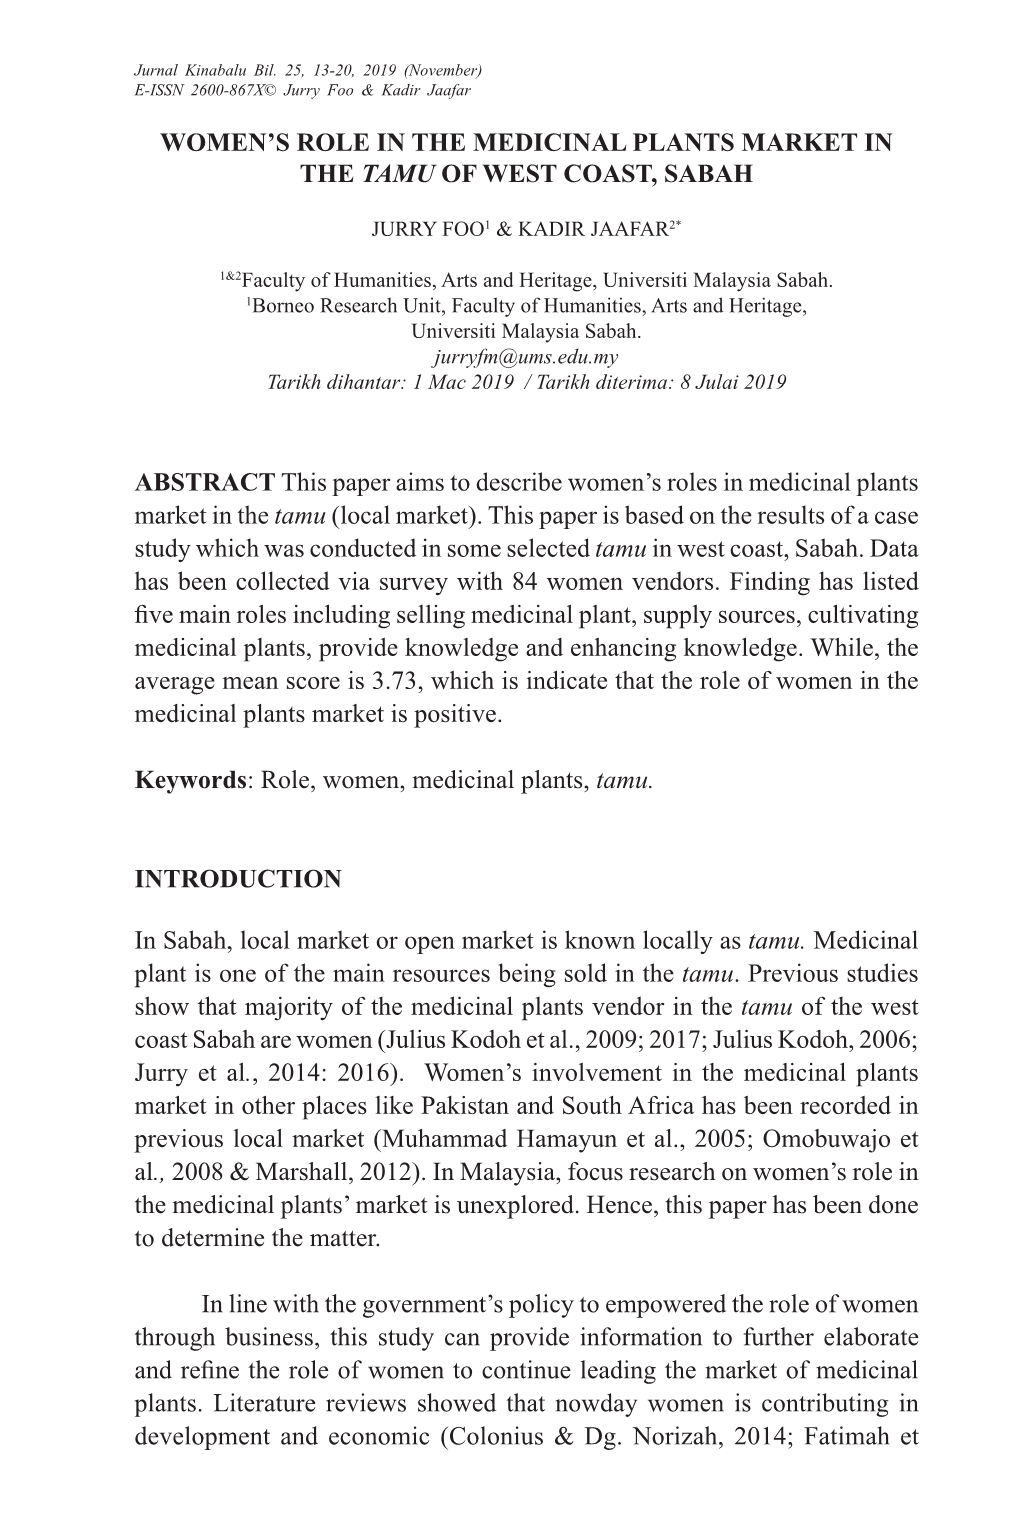 ABSTRACT This Paper Aims to Describe Women's Roles In